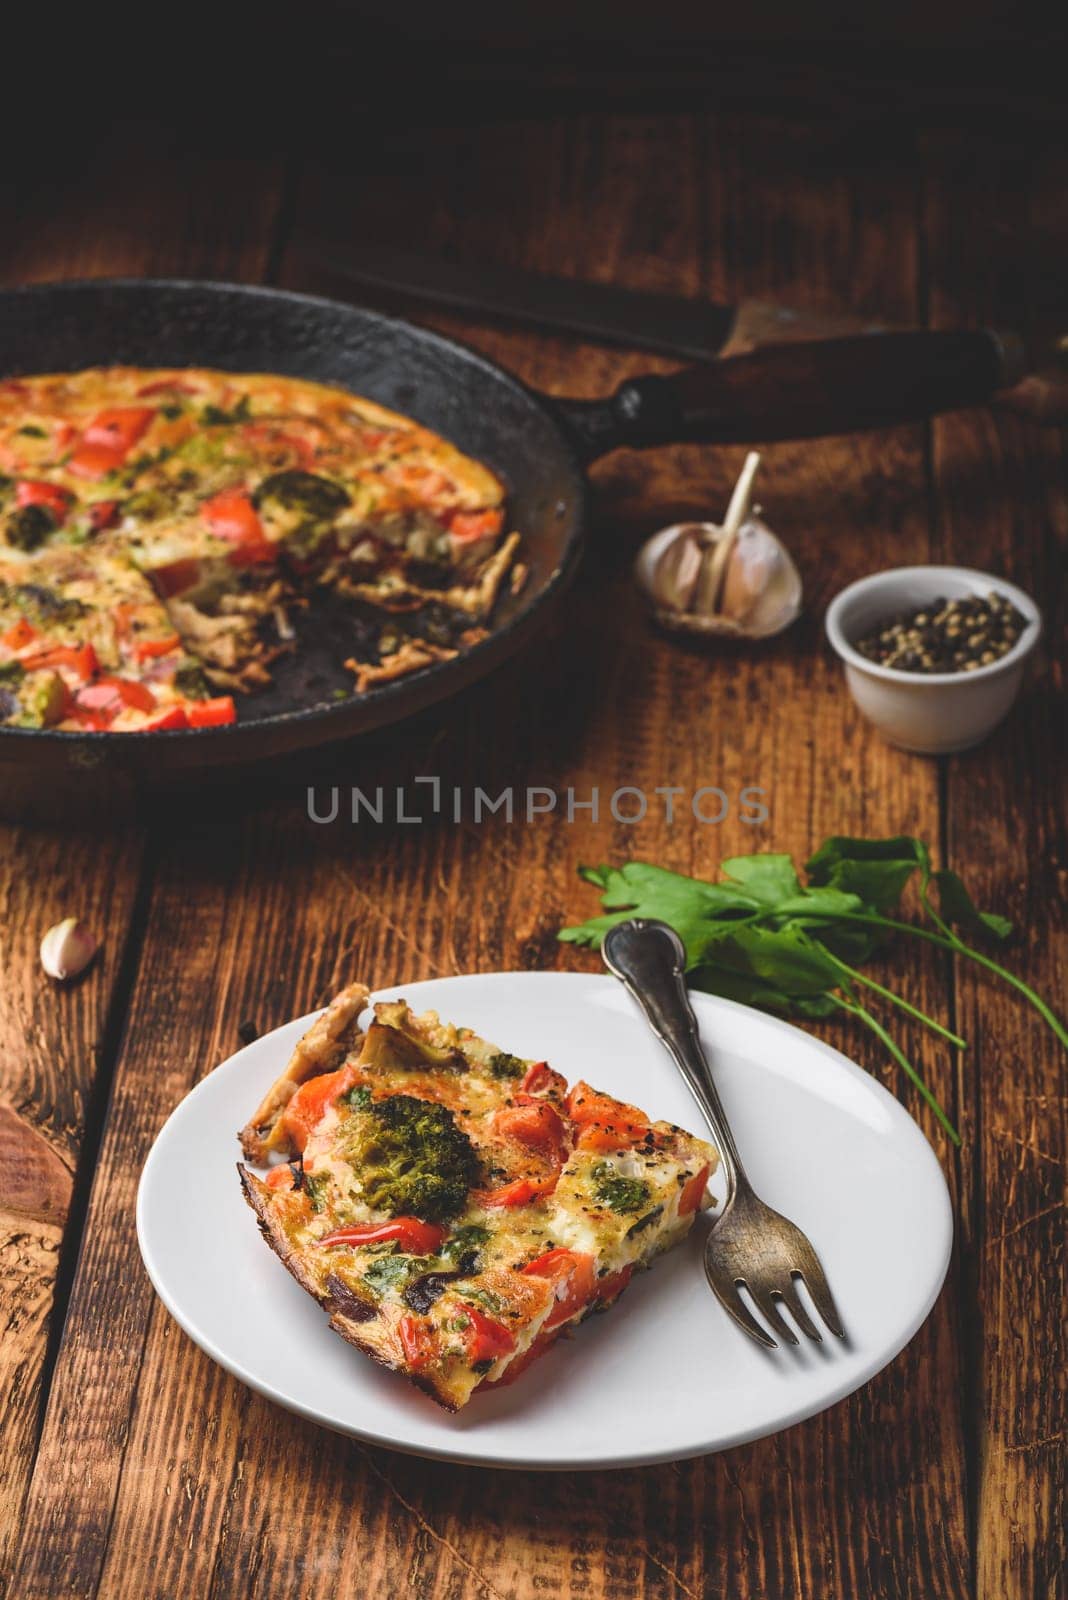 Vegetable frittata with broccoli and red bell pepper by Seva_blsv